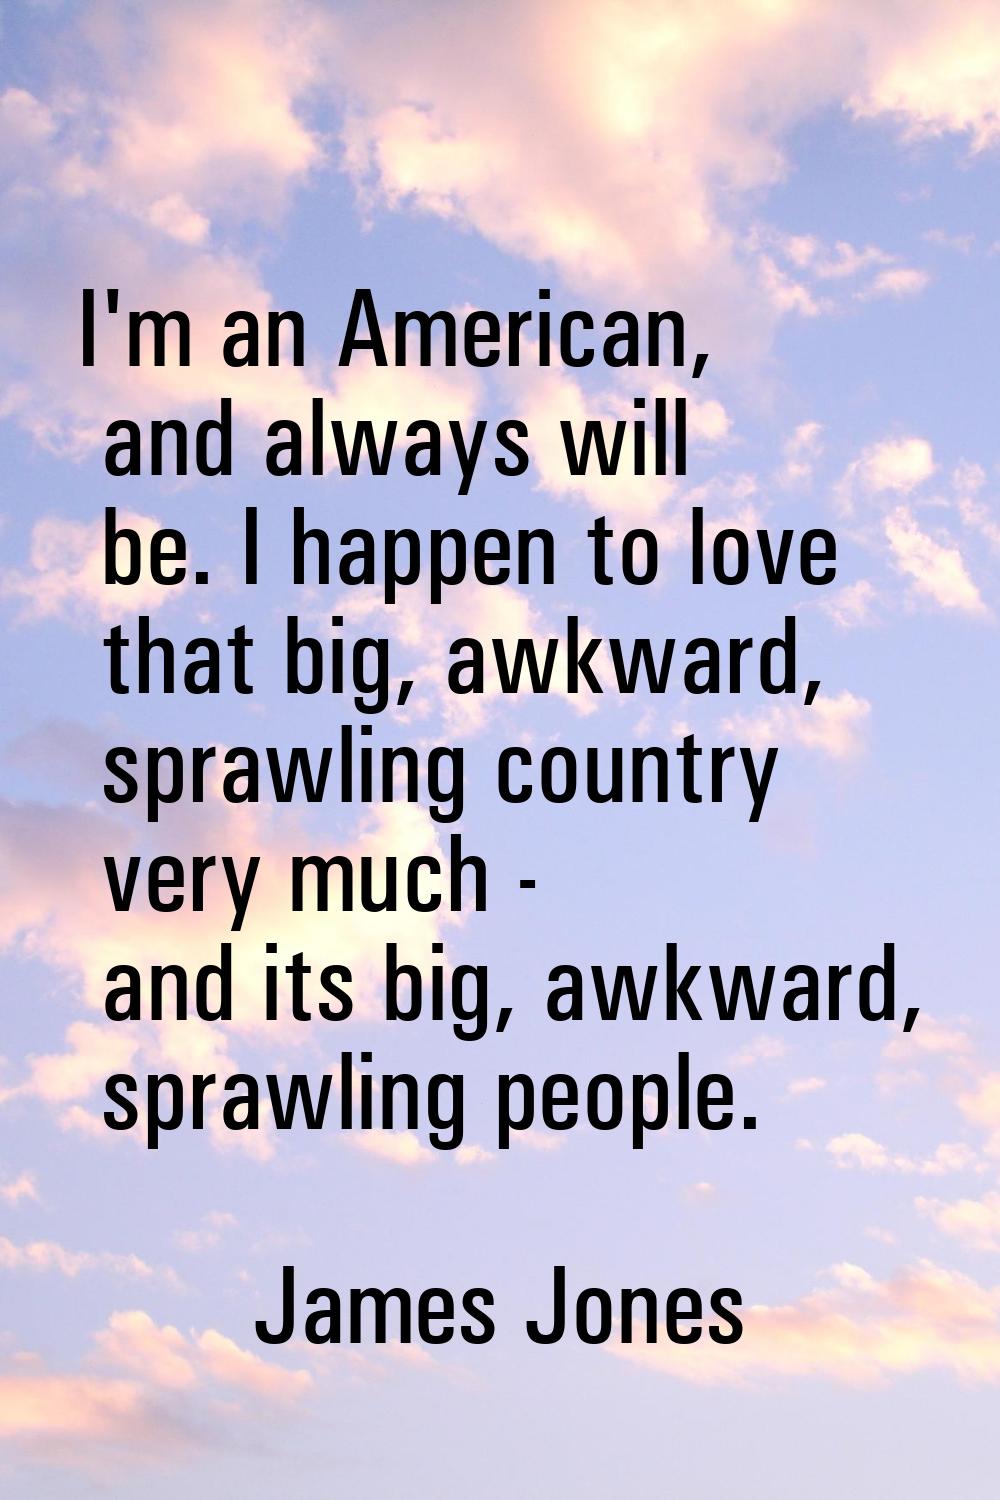 I'm an American, and always will be. I happen to love that big, awkward, sprawling country very muc